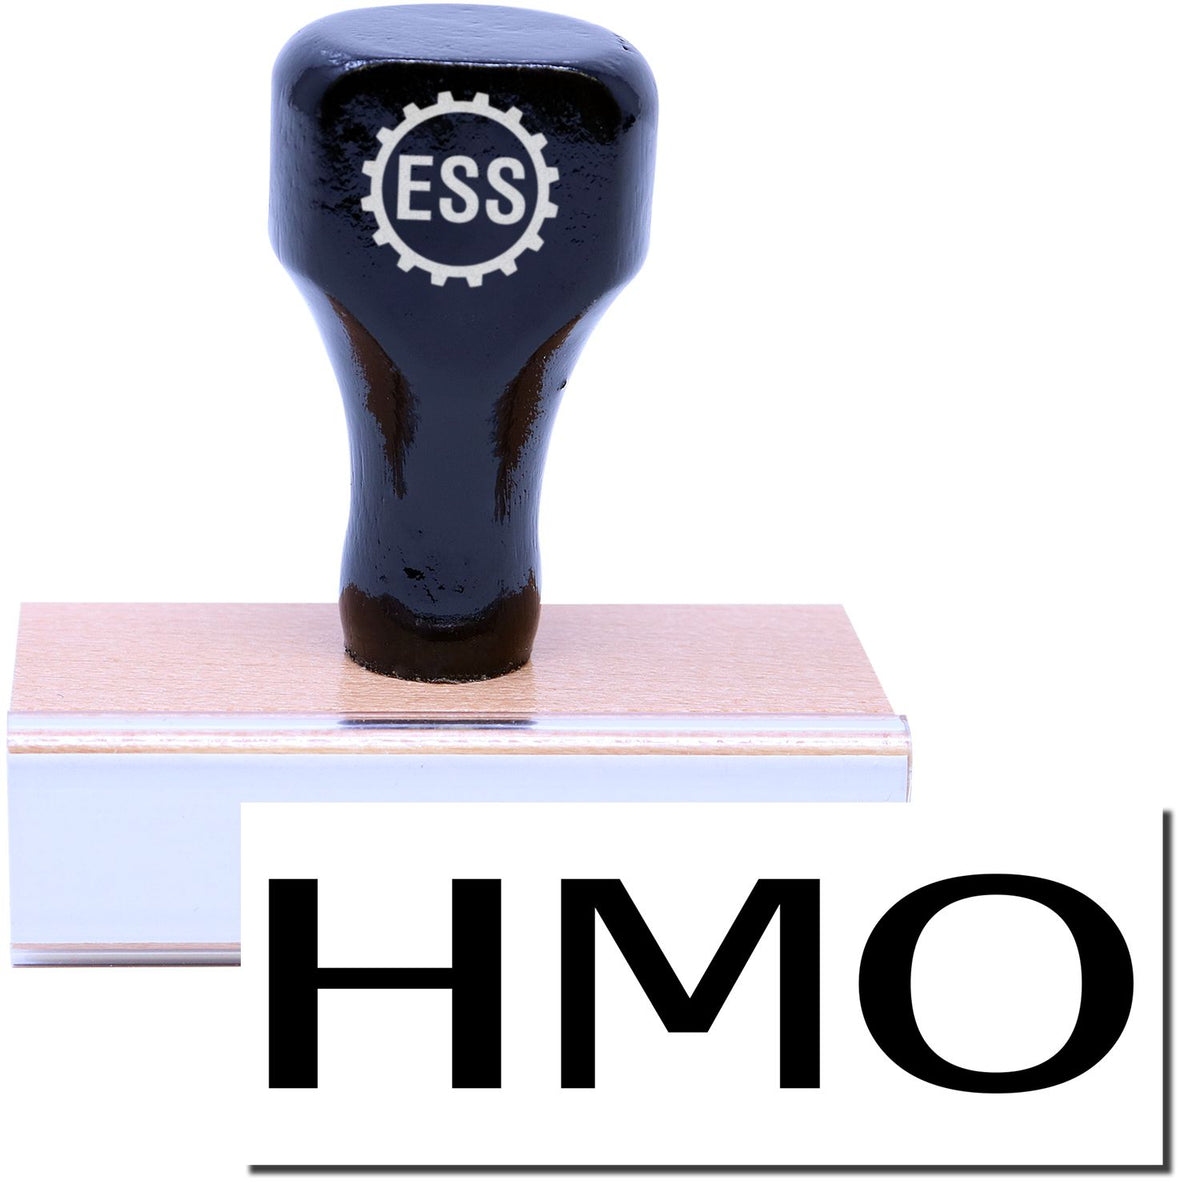 A stock office medical rubber stamp with a stamped image showing how the text &quot;HMO&quot; is displayed after stamping.